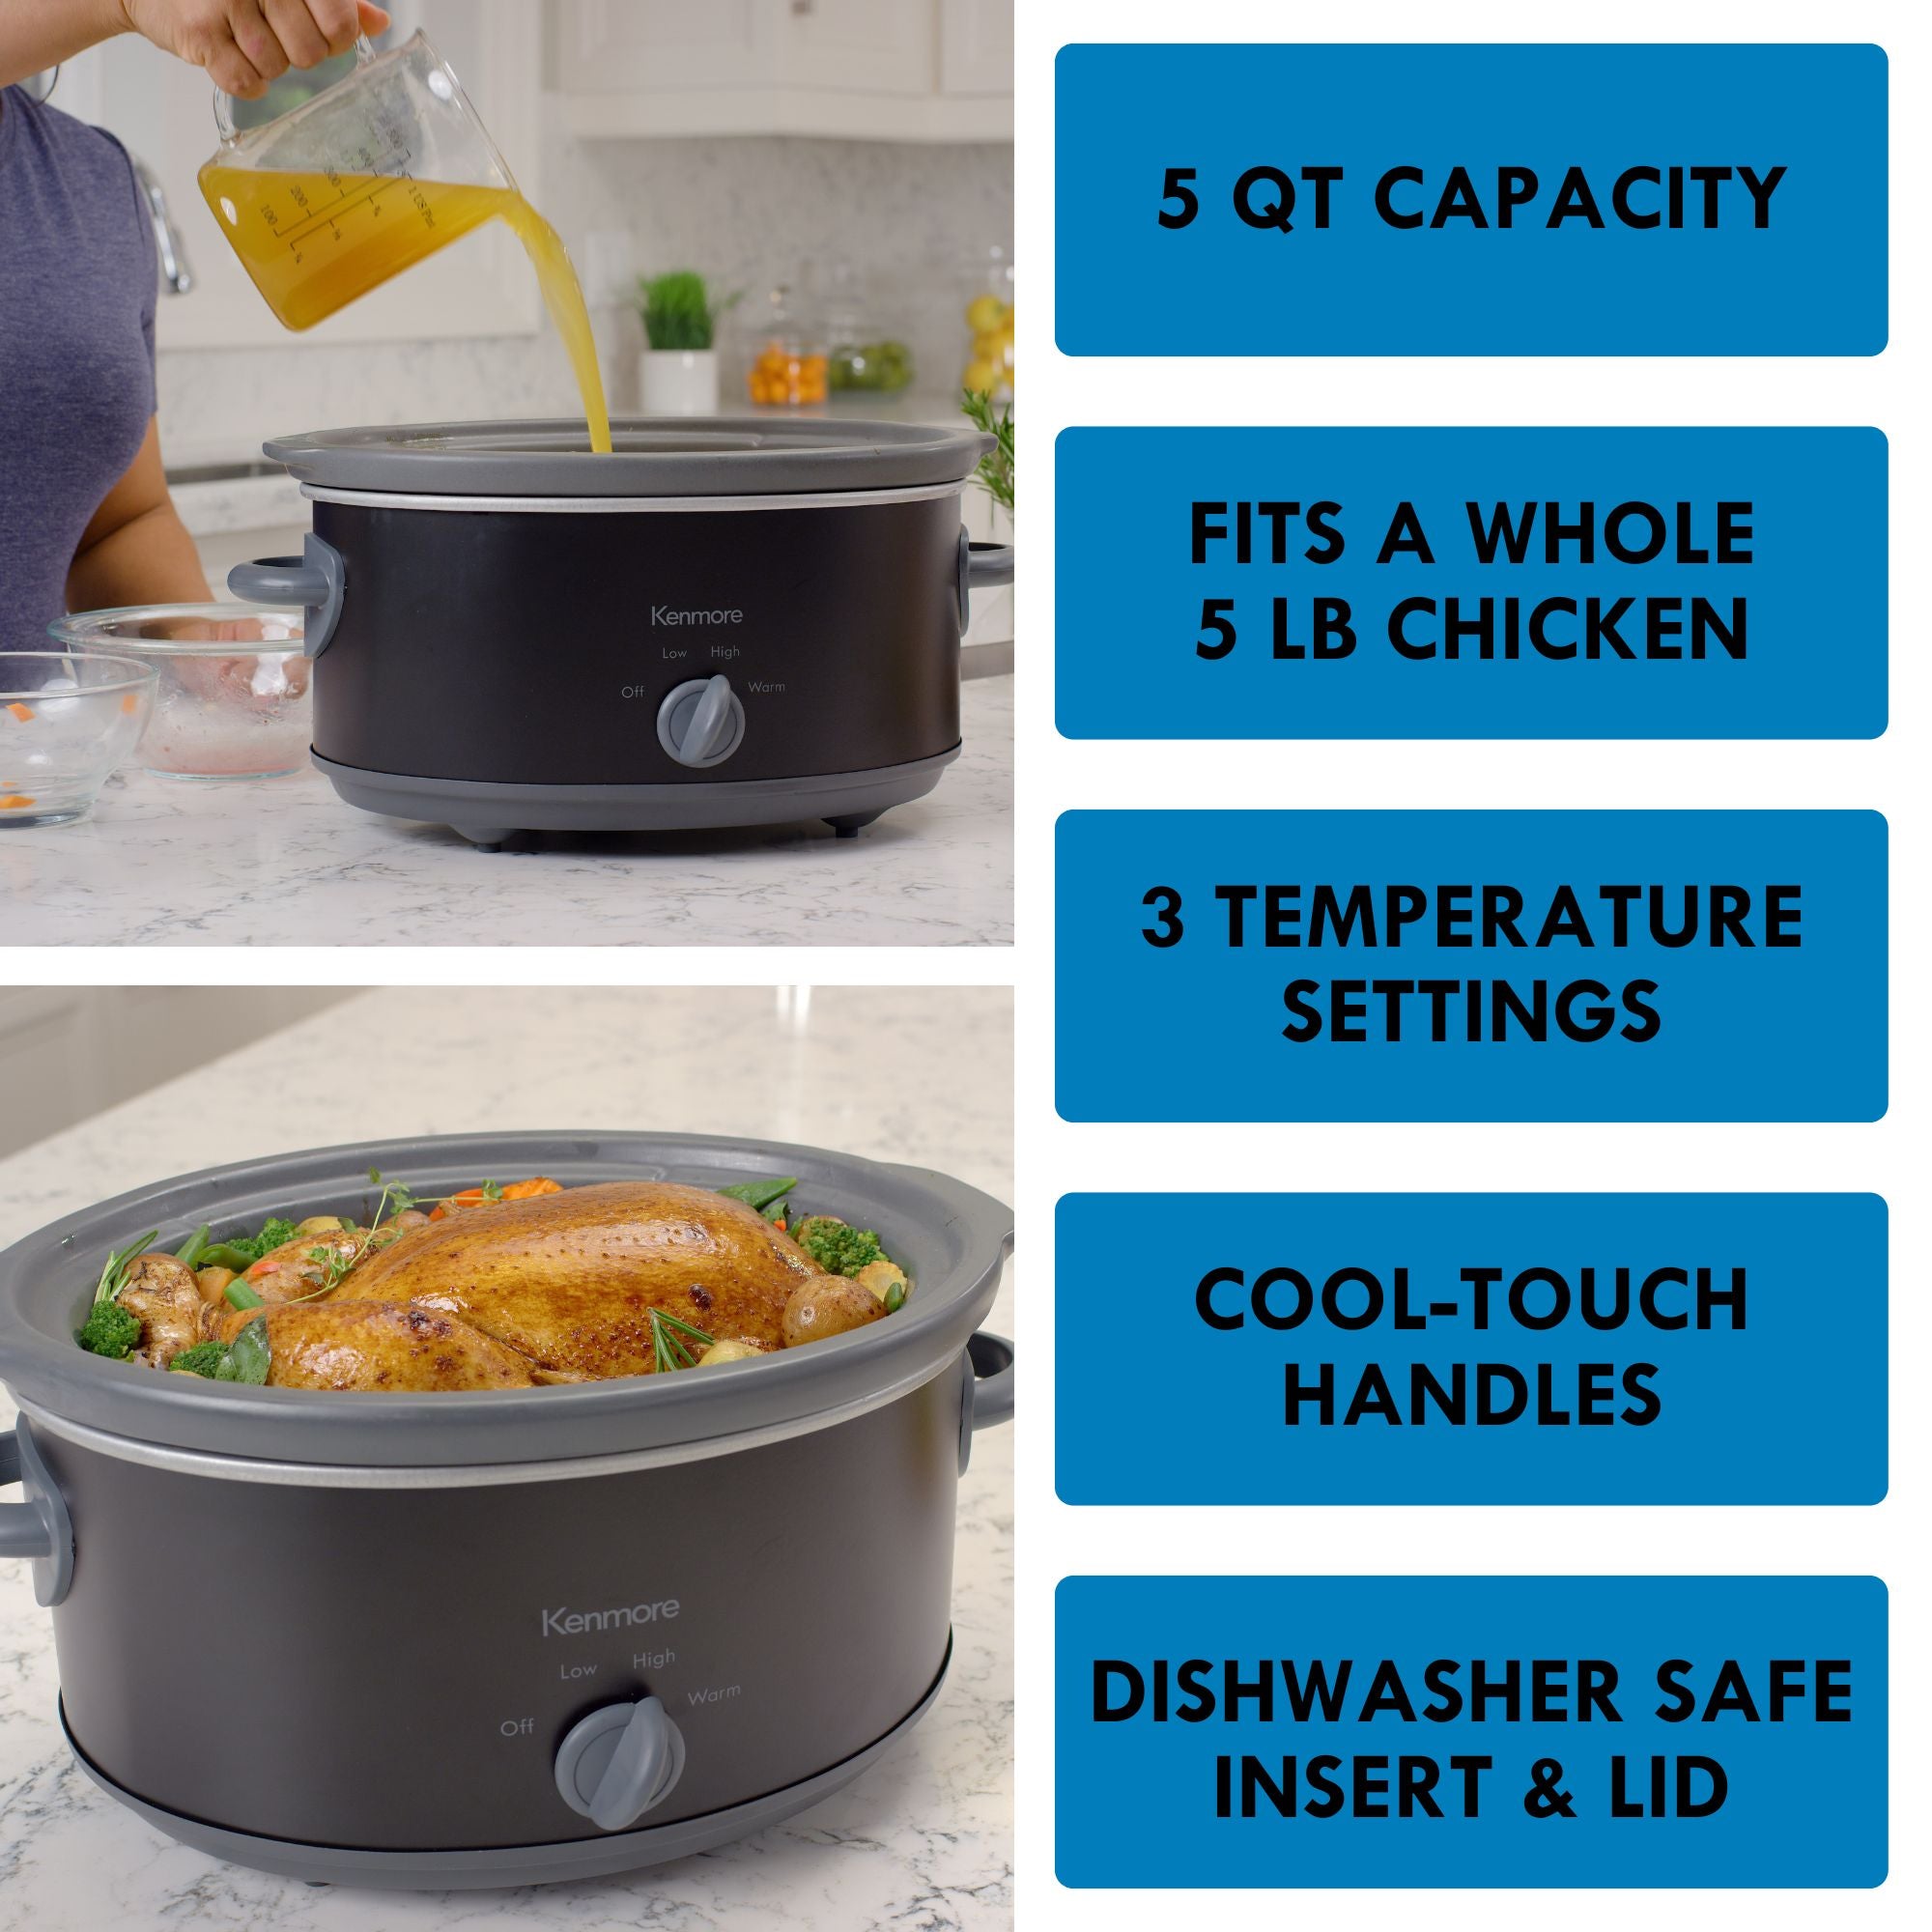 Two pictures show a person wearing a blue shirt pouring stock from a measuring cup into the Kenmore 5 qt slow cooker (top) and slow cooker with a whole roast chicken in it and the lid off (bottom) with features listed to the right: 5-qt capacity; Fits a whole 5 lb chicken; 3 temperature settings; cool-touch handles; dishwasher-safe insert and lid